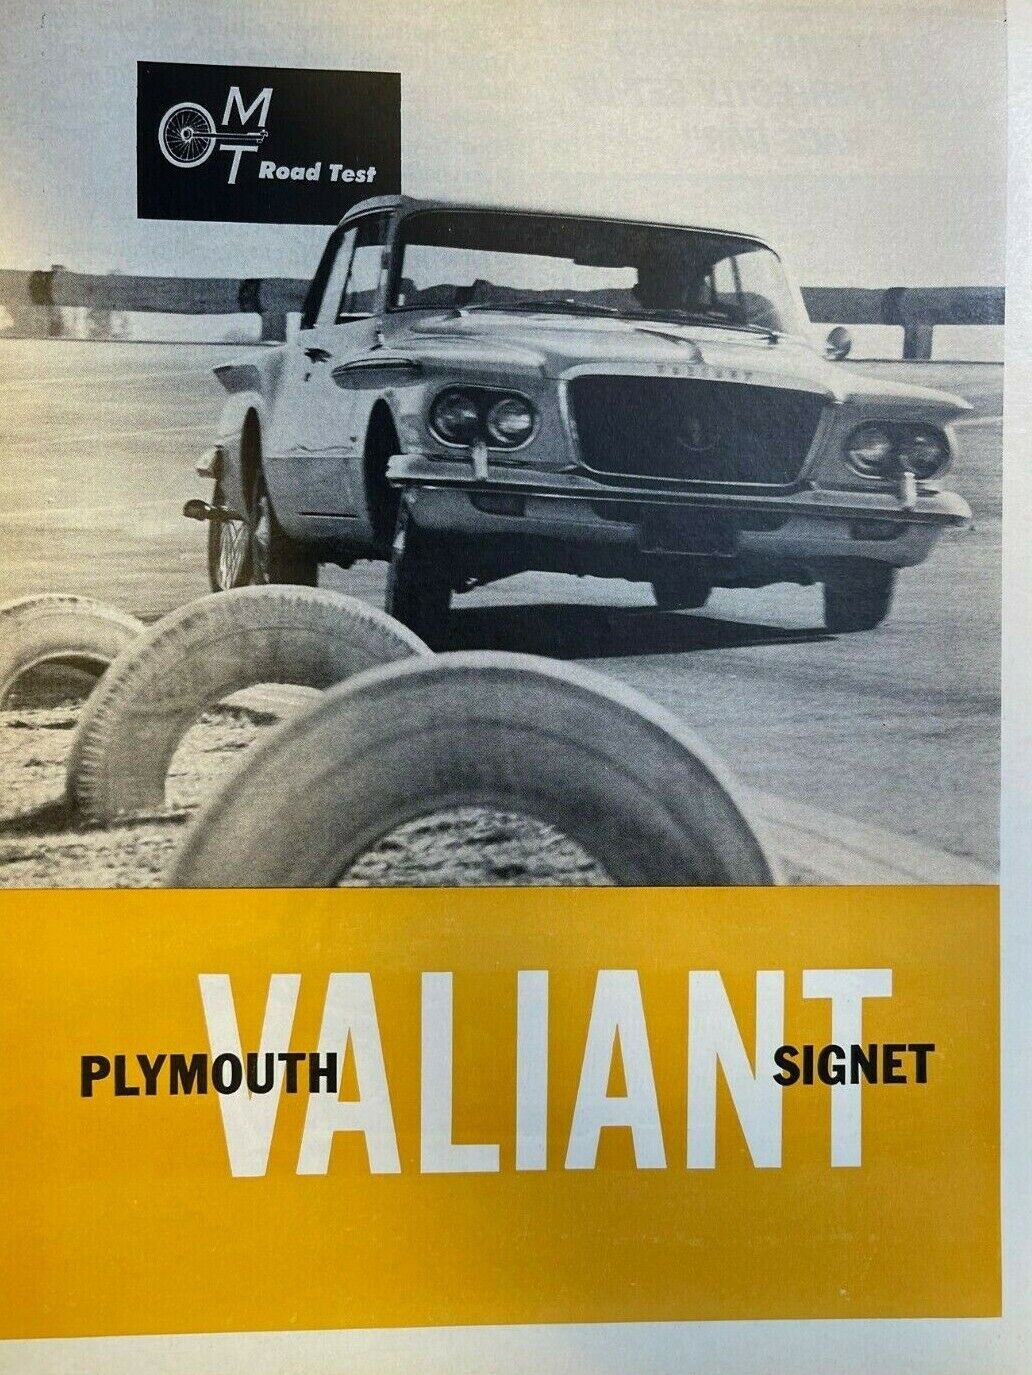 Road Test 1962 Plymouth Valiant Signet illustrated